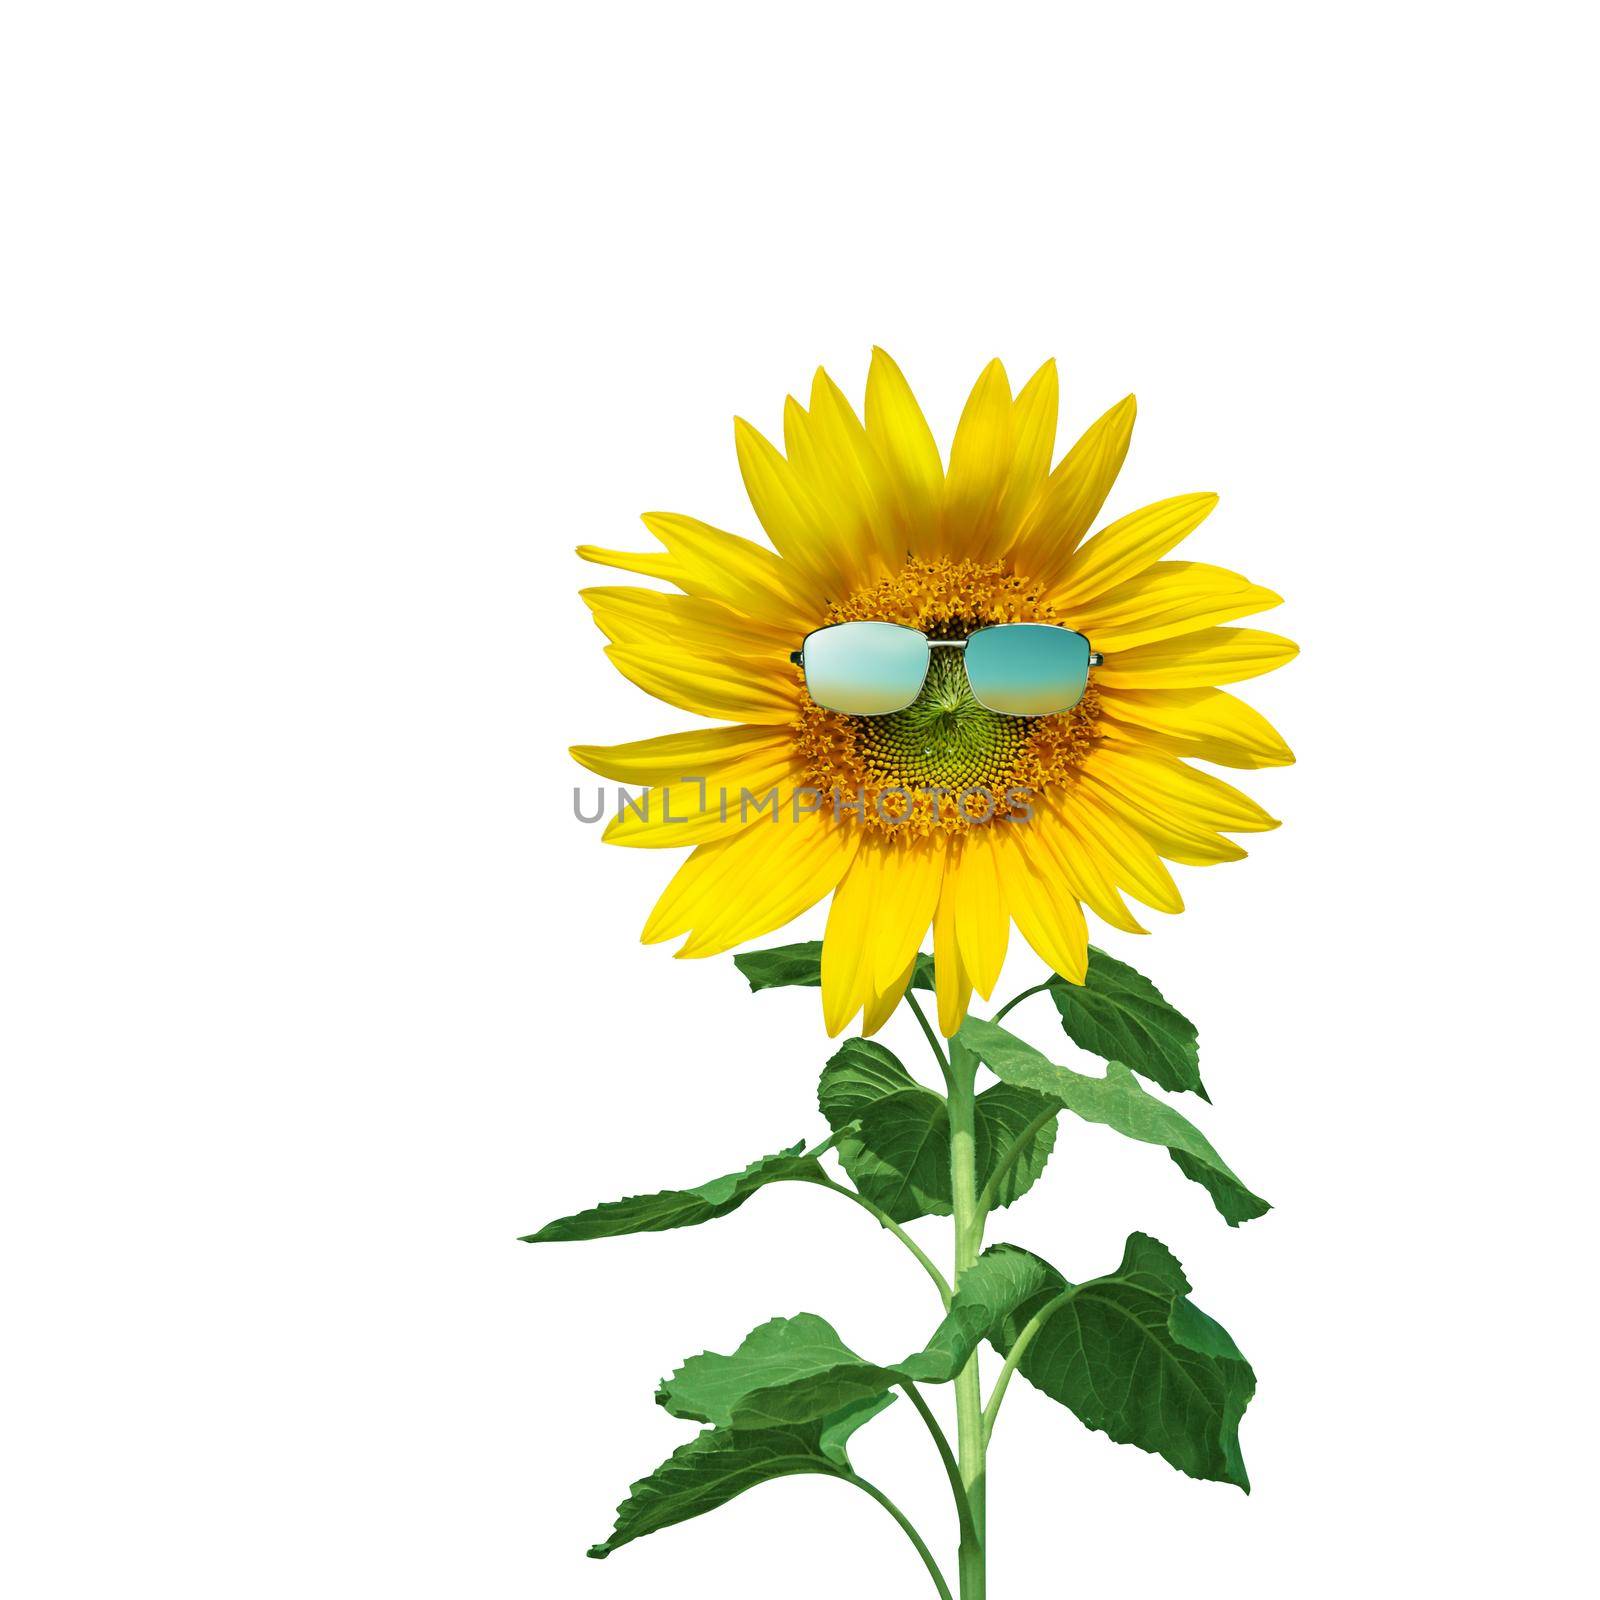 Funny sunflower with sunglasses on a white background by Taut